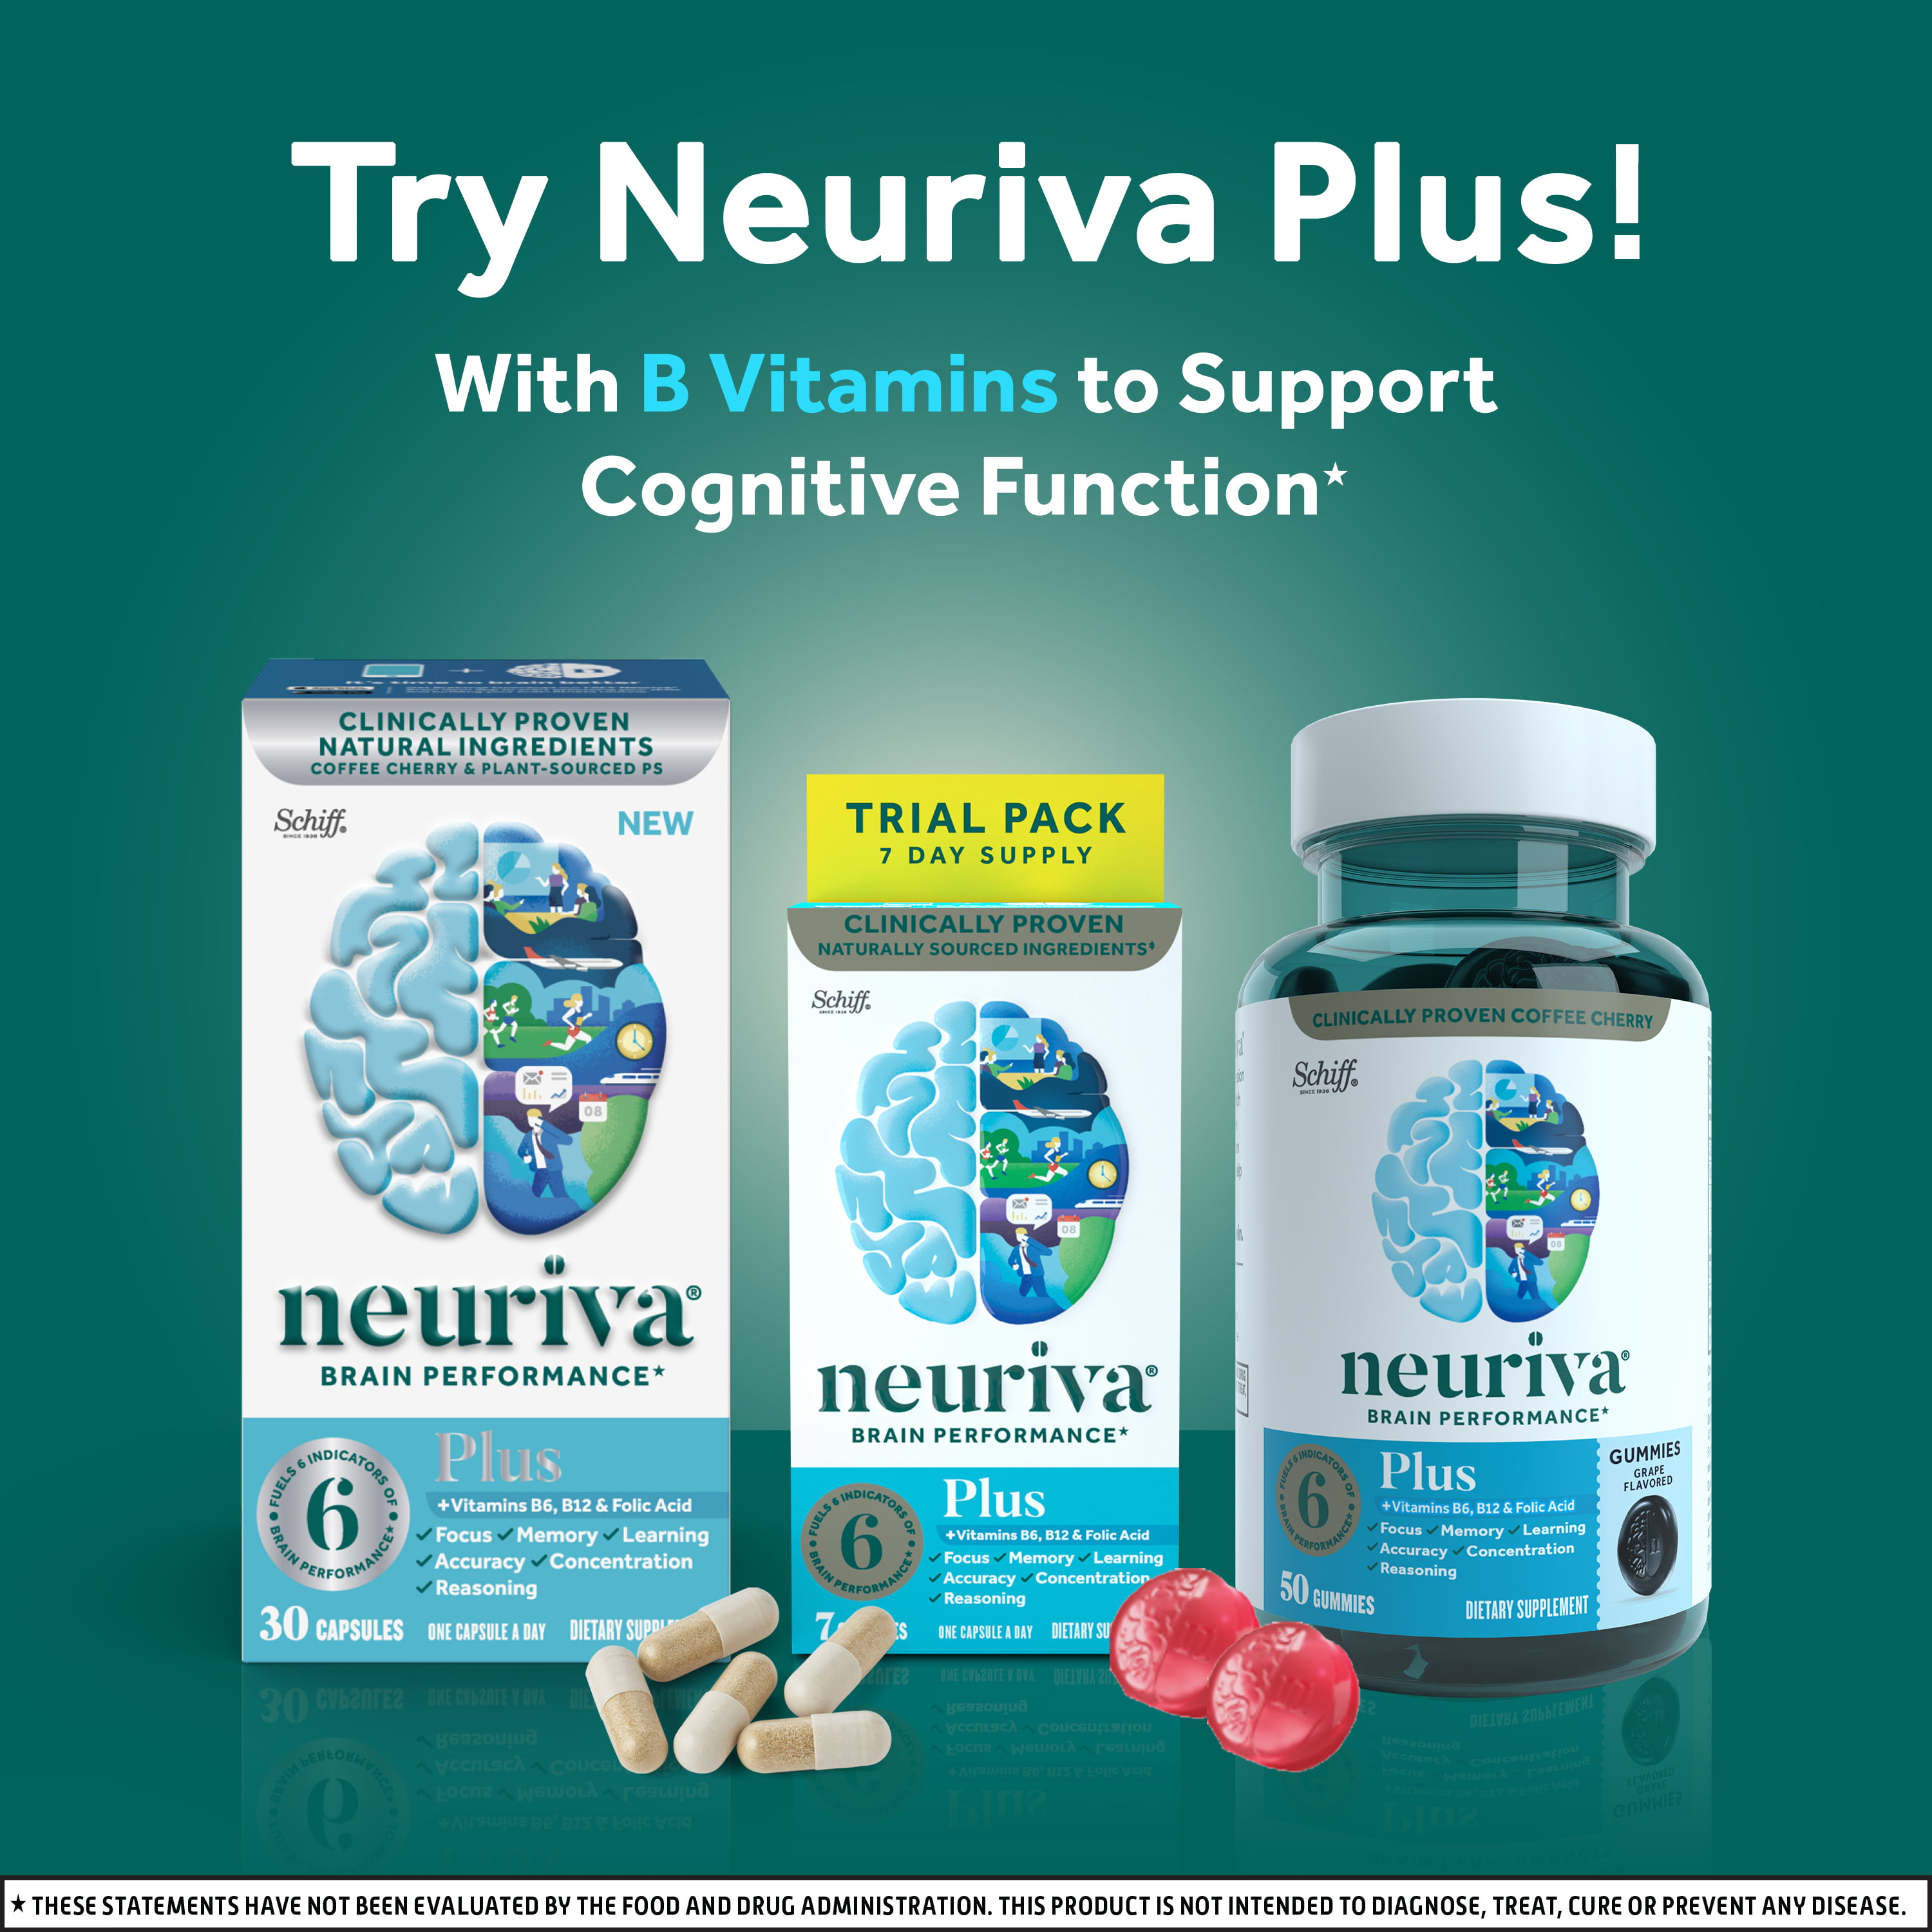 NEURIVA Original Brain Supplement for Memory, Focus & Concentration + Learning & Accuracy with Clinically Tested Nootropics Phosphatidylserine and Neurofactor, Caffeine Free, 50ct Grape Gummies